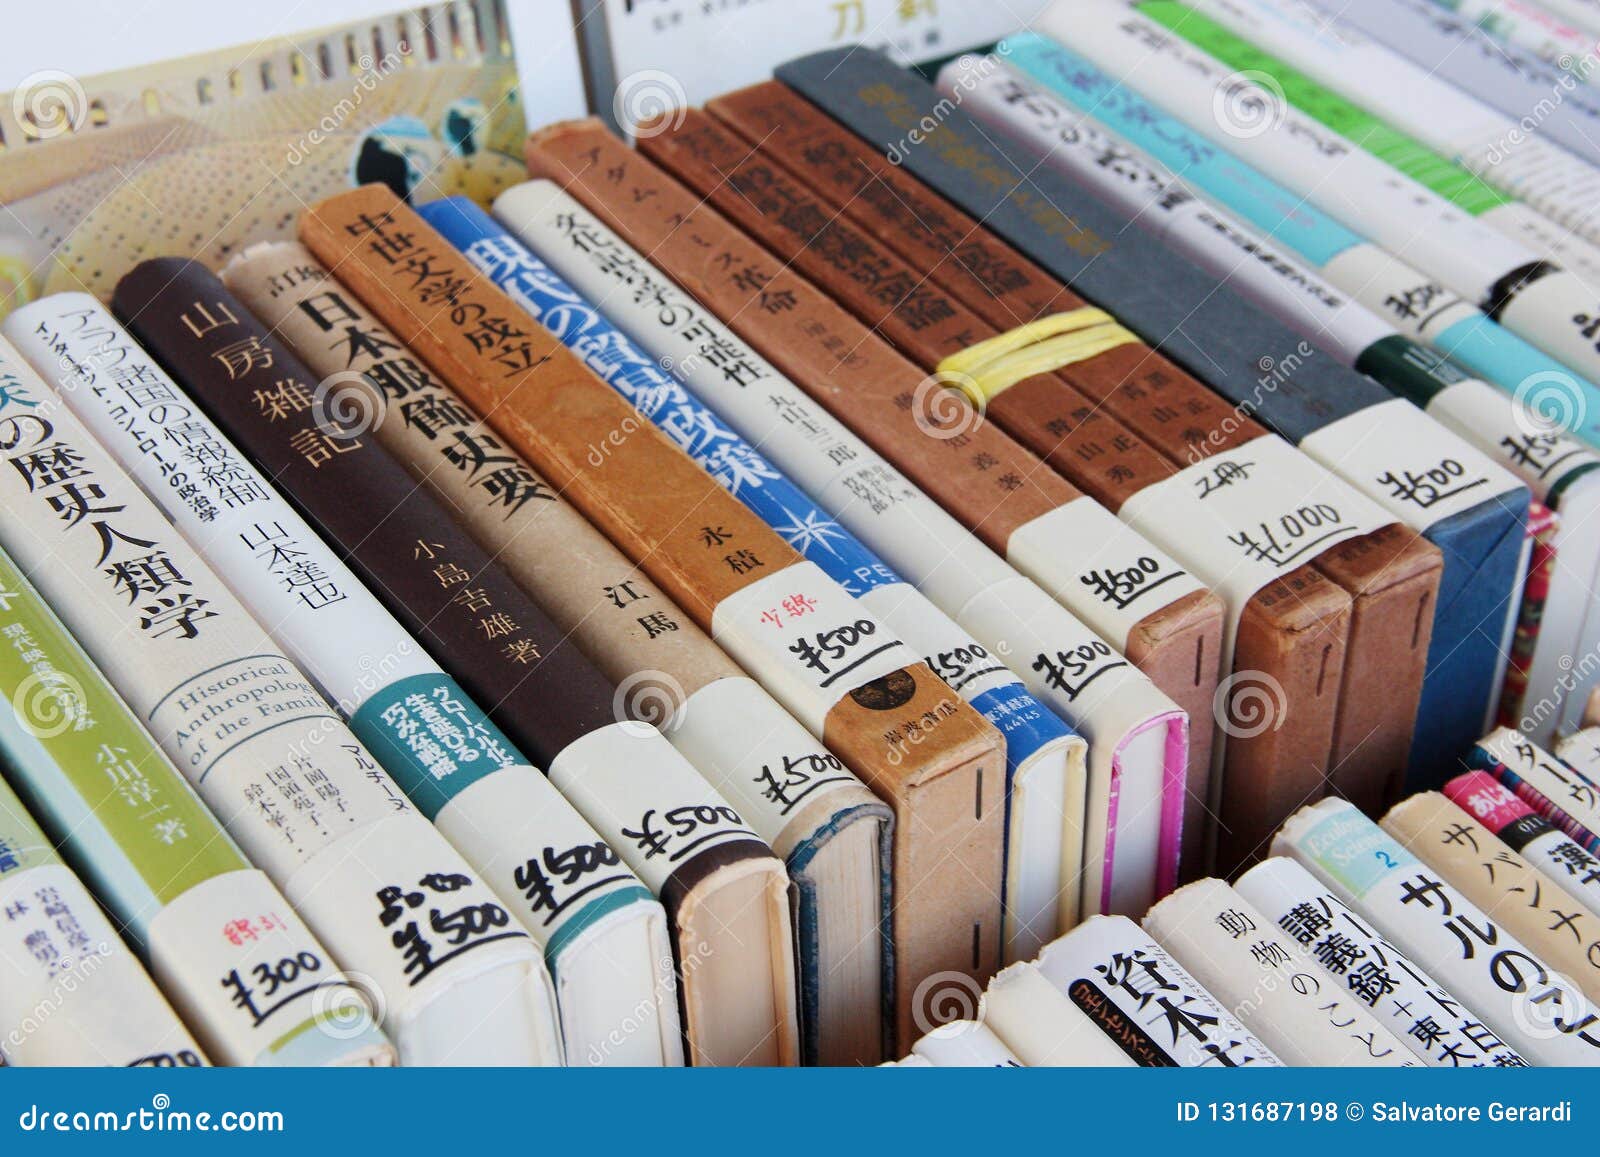 Japanese books close up editorial stock photo. Image of archive 131687198